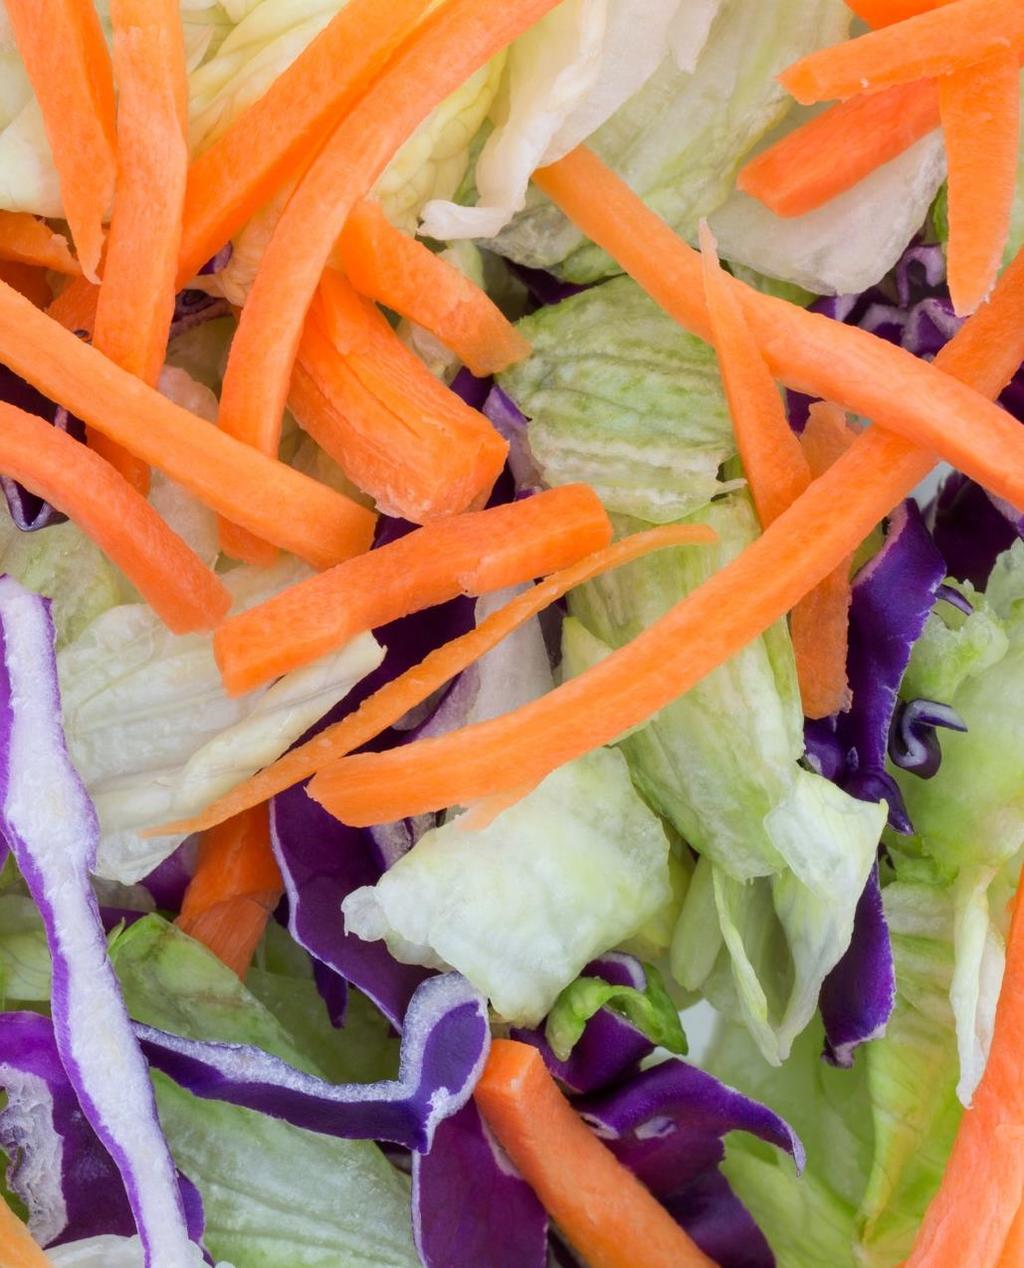 McDonalds Salad Outbreak: WI 10 cases reported eating salads from McDonald s.